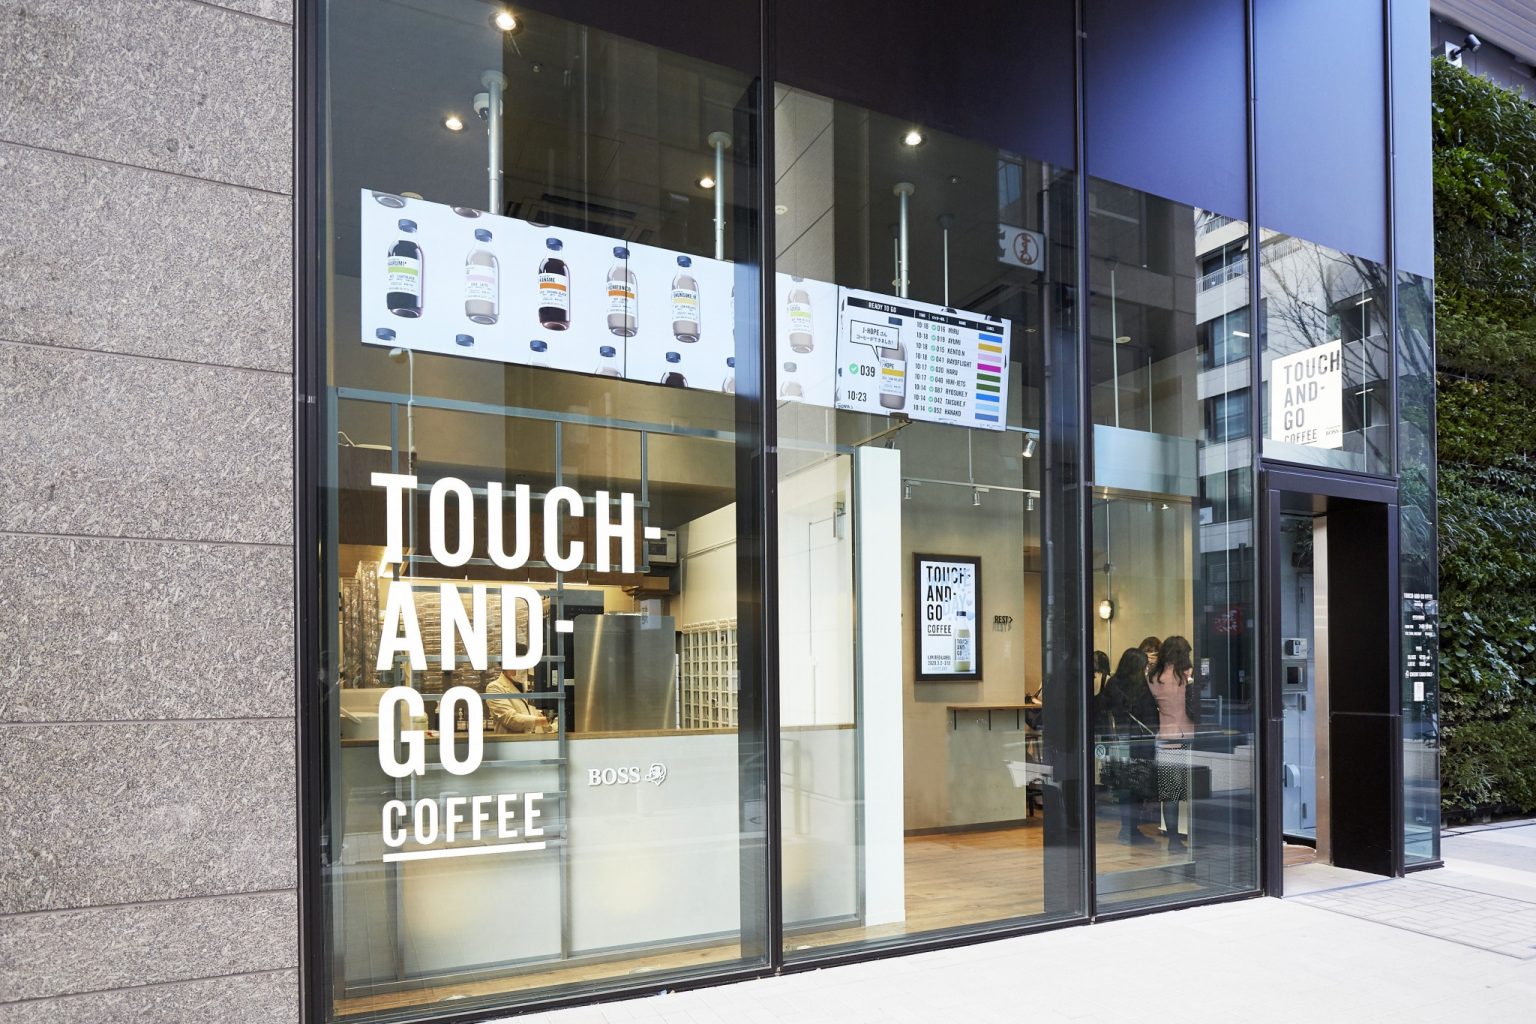 〈TOUCH-AND-GO COFFEE〉日本橋